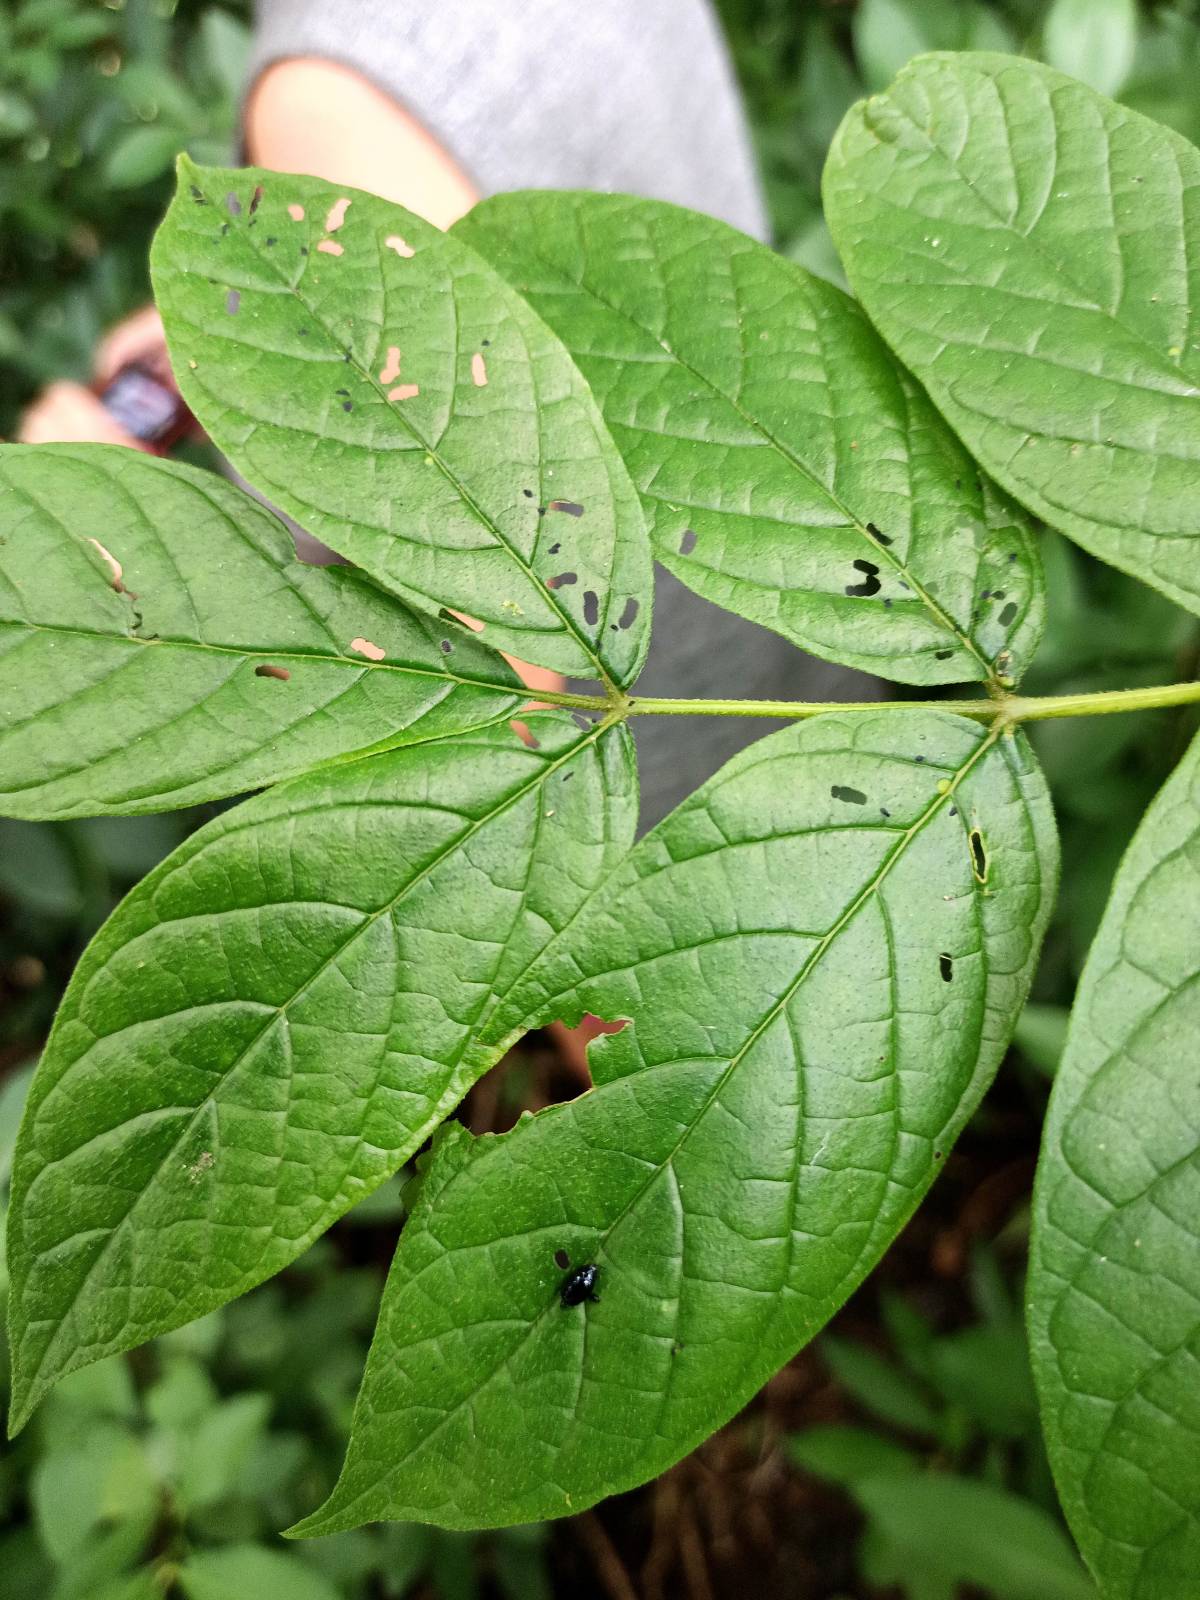 Signs of damage on leaves.. 